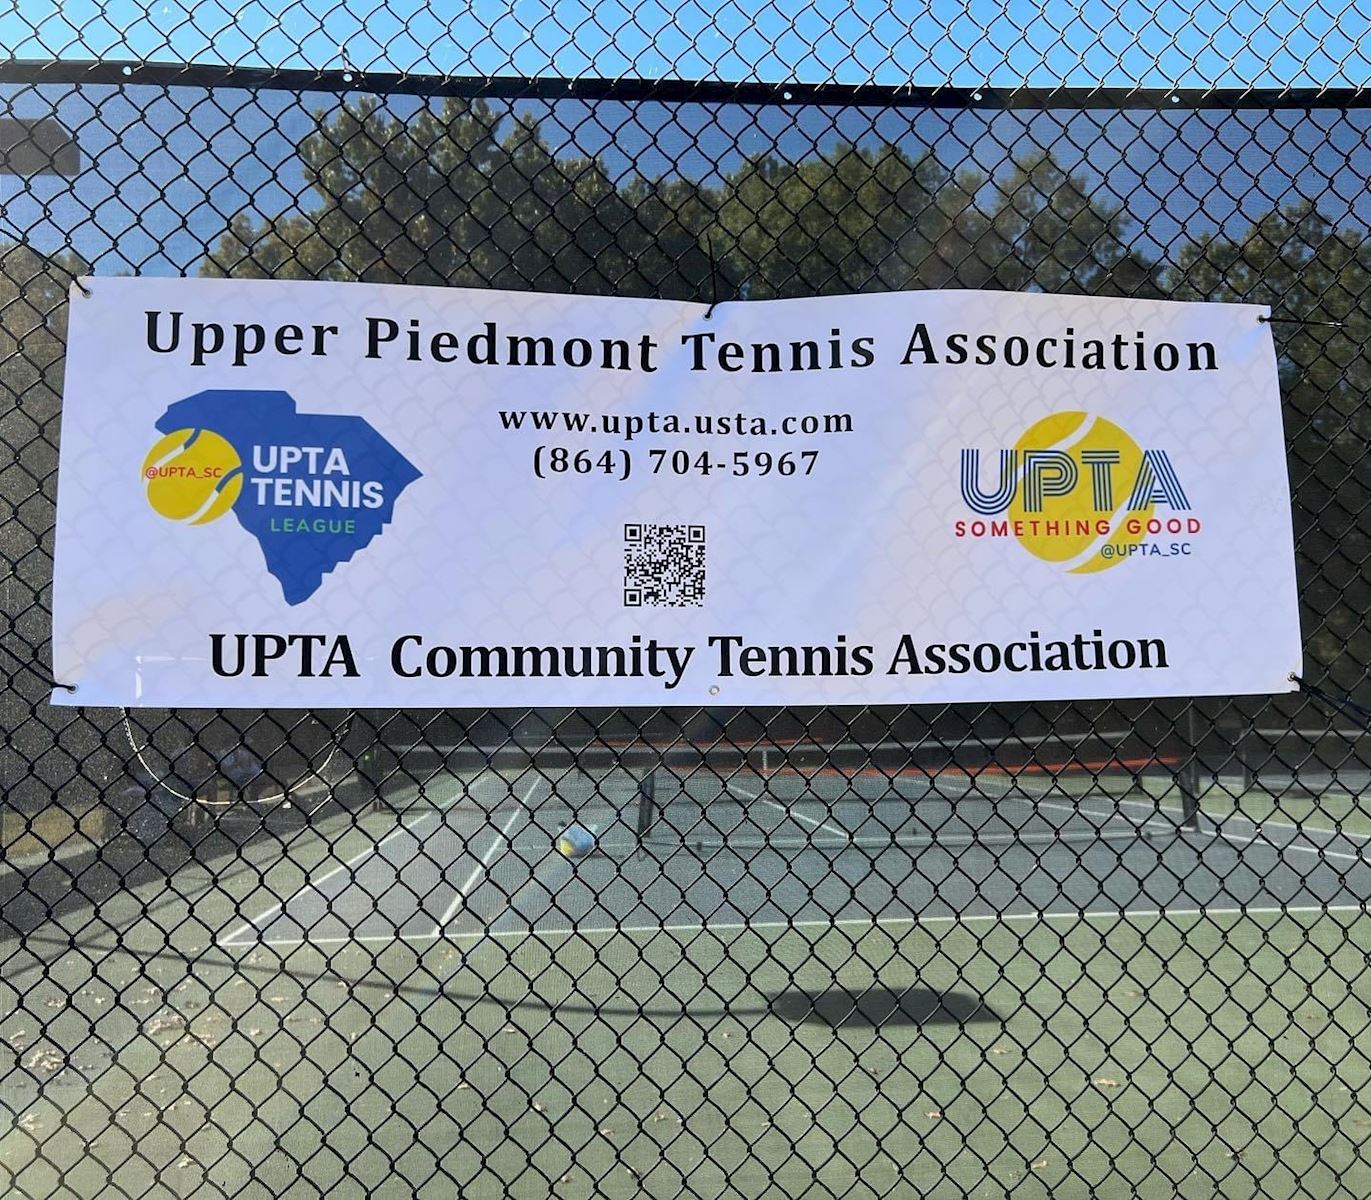 Fun Fall Tennis Event to benefit Greenville Animal Care